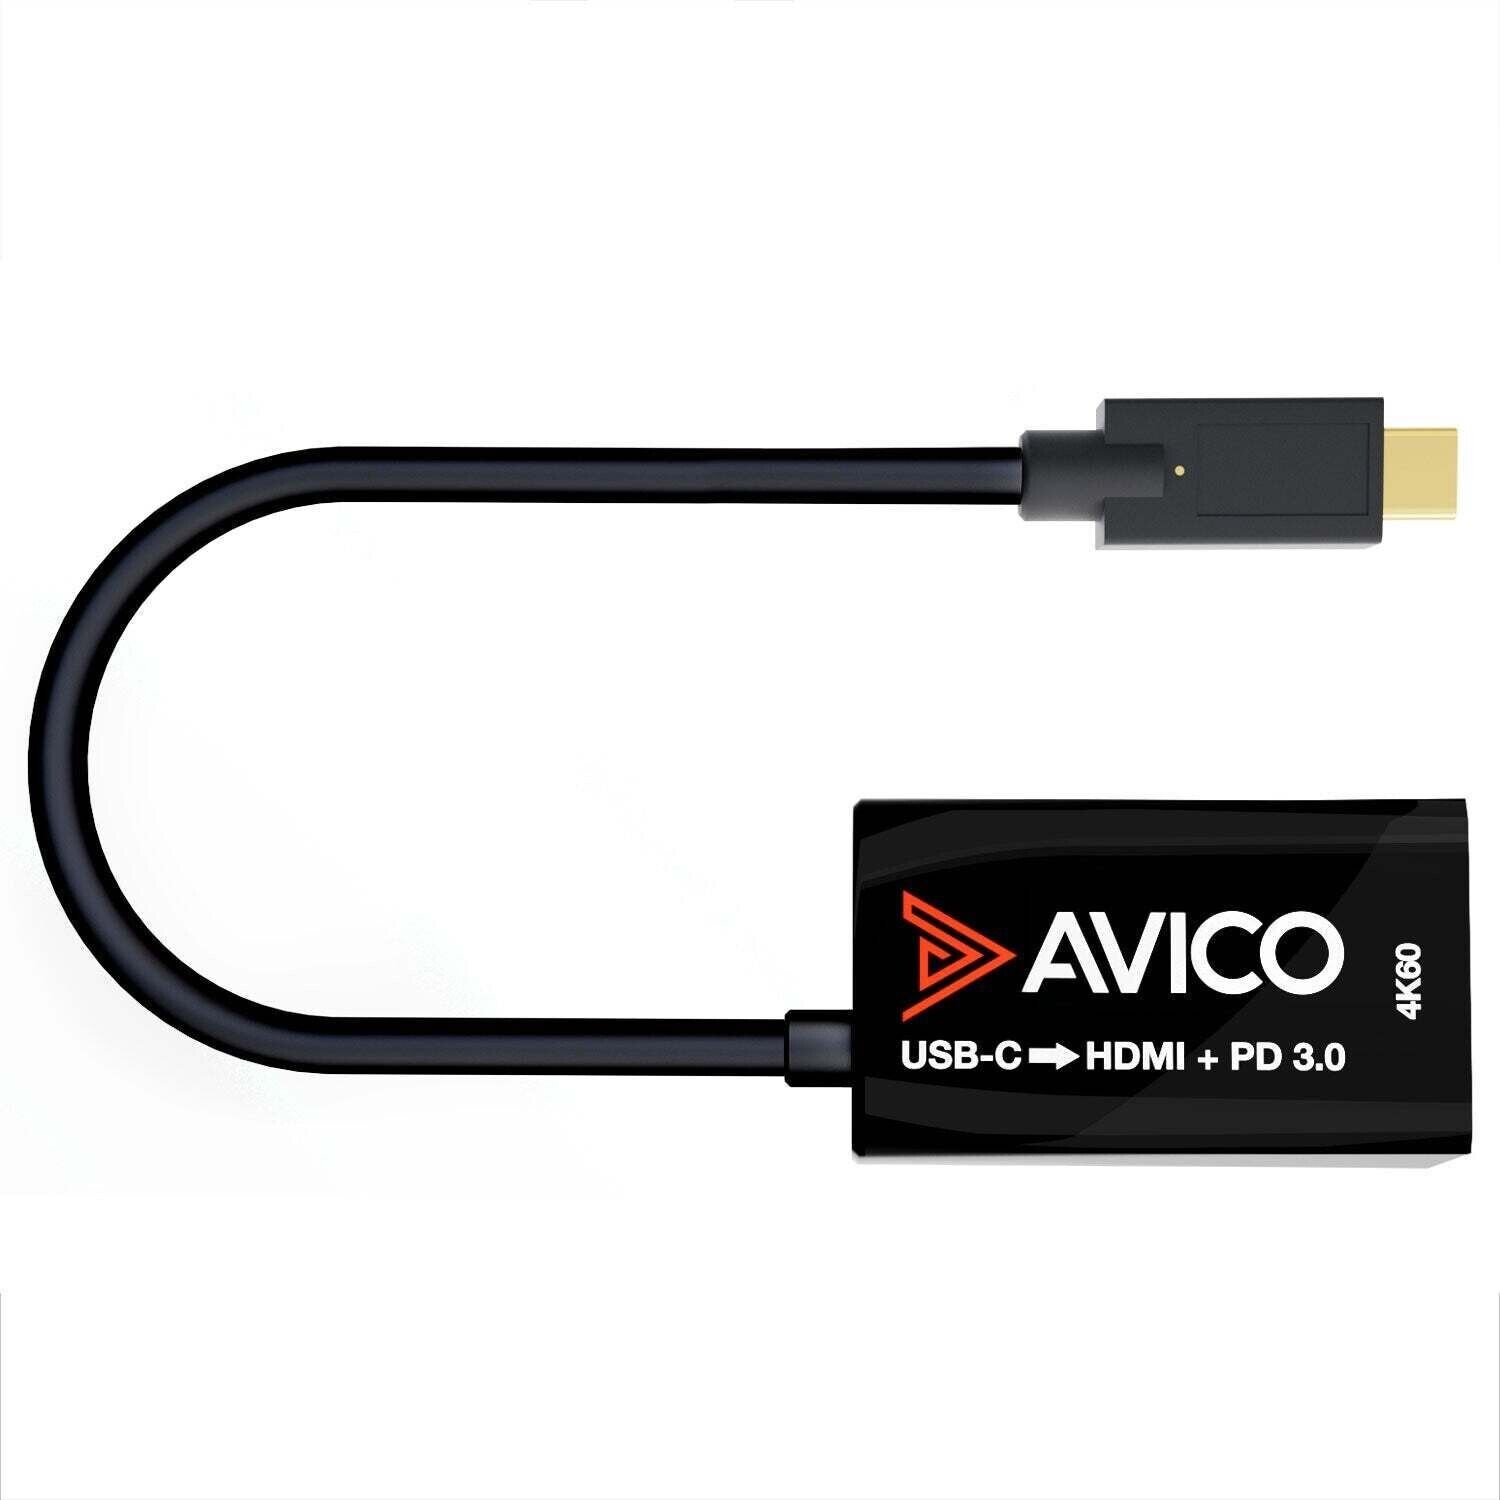 Avico USB-C to HDMI 2.0 Adapter with 100W Charging – 4K@60hz HDR – 2K@144hz